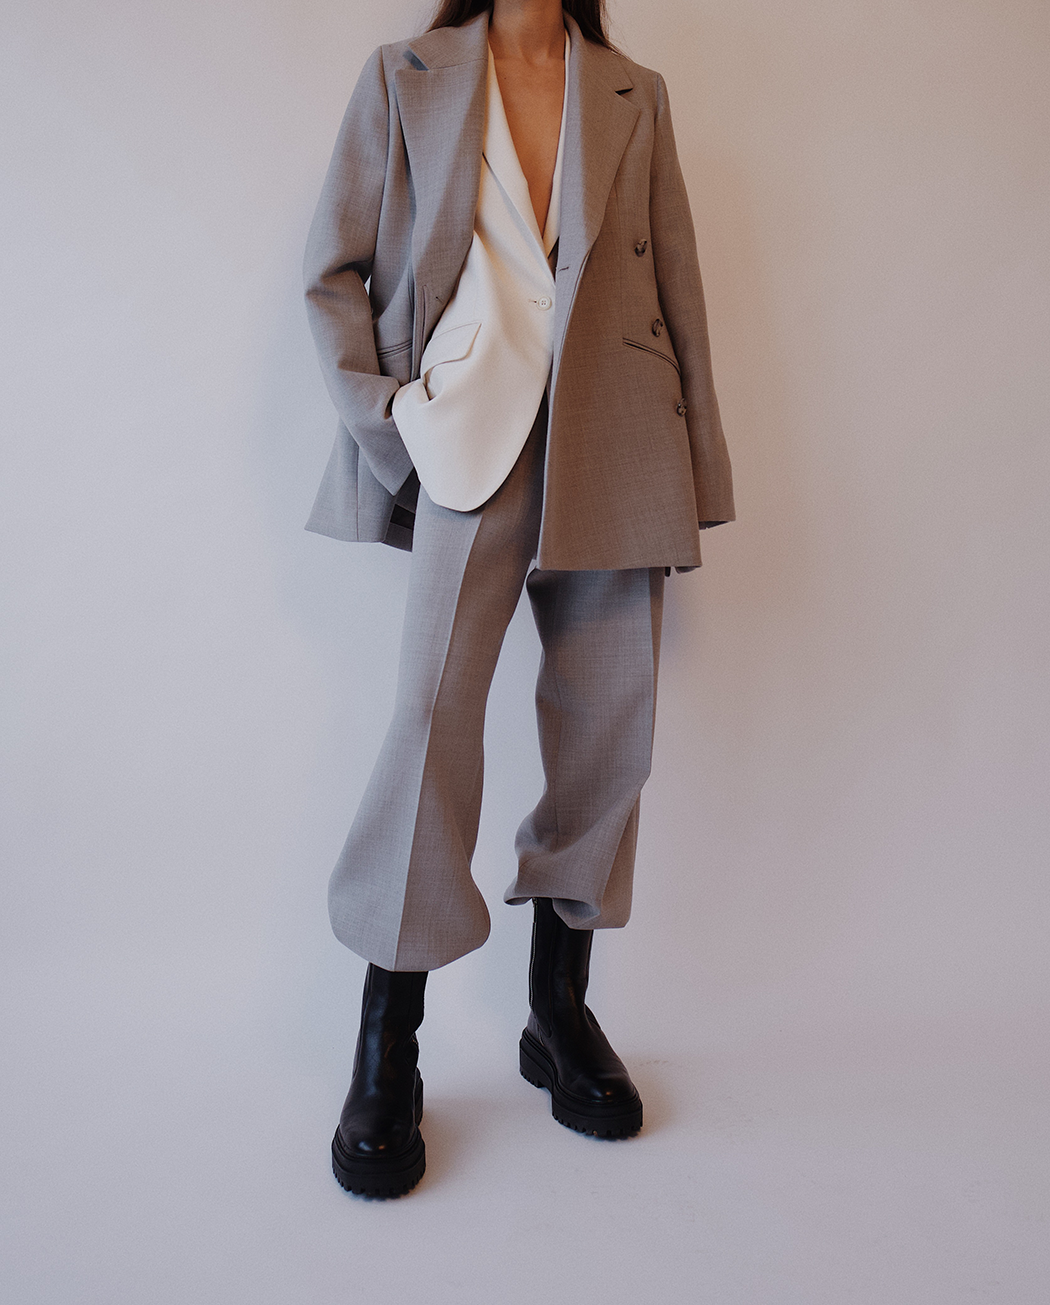 The Oversized Suit | MODEDAMOUR - The Oversized Suit | MODEDAMOUR -   16 style Mens suit ideas